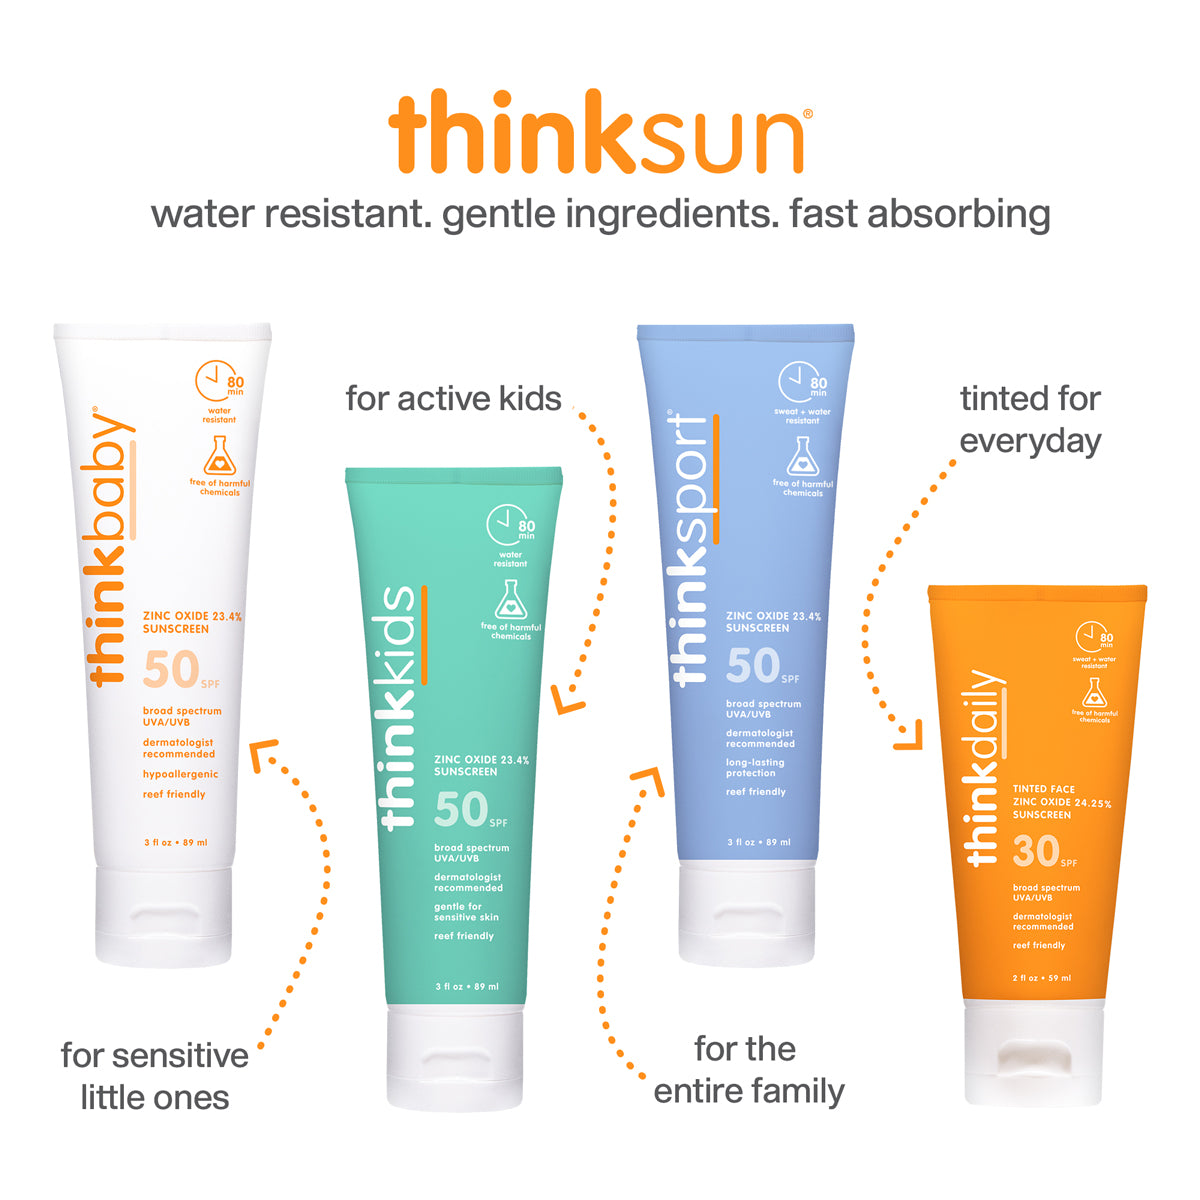 ThinkSun sunscreen lineup, including ThinkBaby, ThinkKids, ThinkSport, and ThinkDaily, showing specific uses from sensitive little ones to daily tinted face sunscreen.